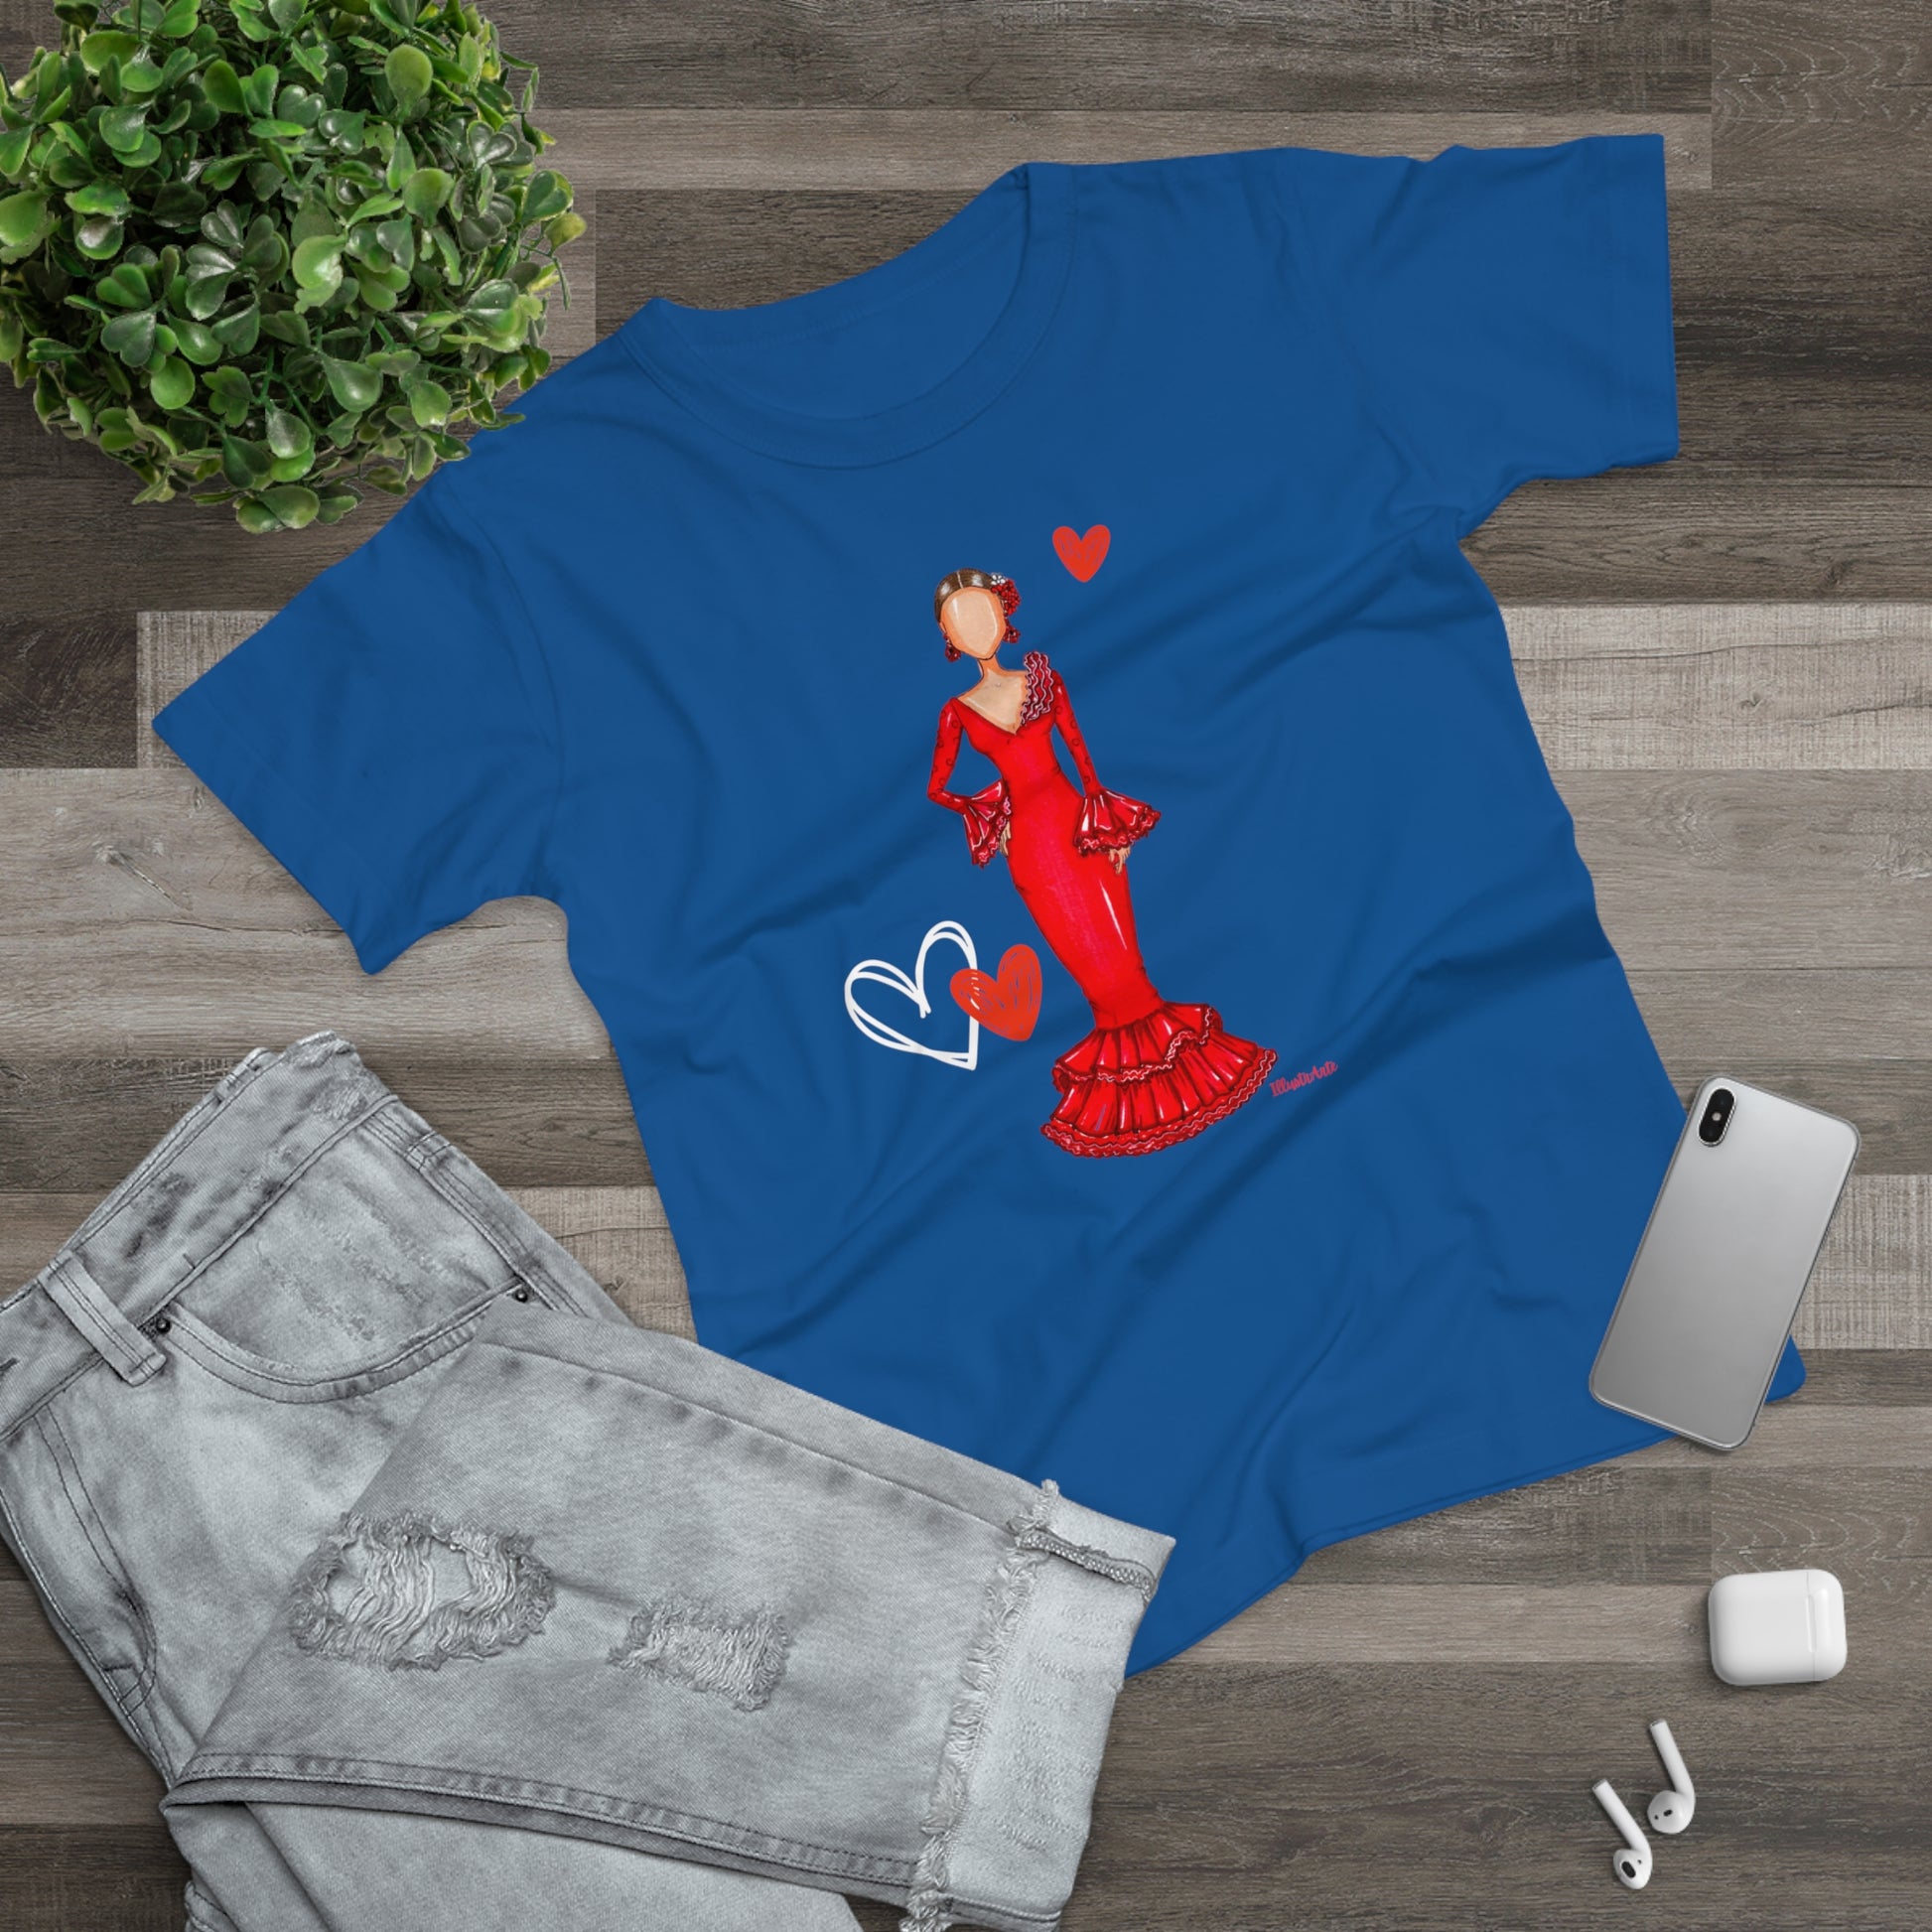 a blue t - shirt with a picture of a woman in a red dress